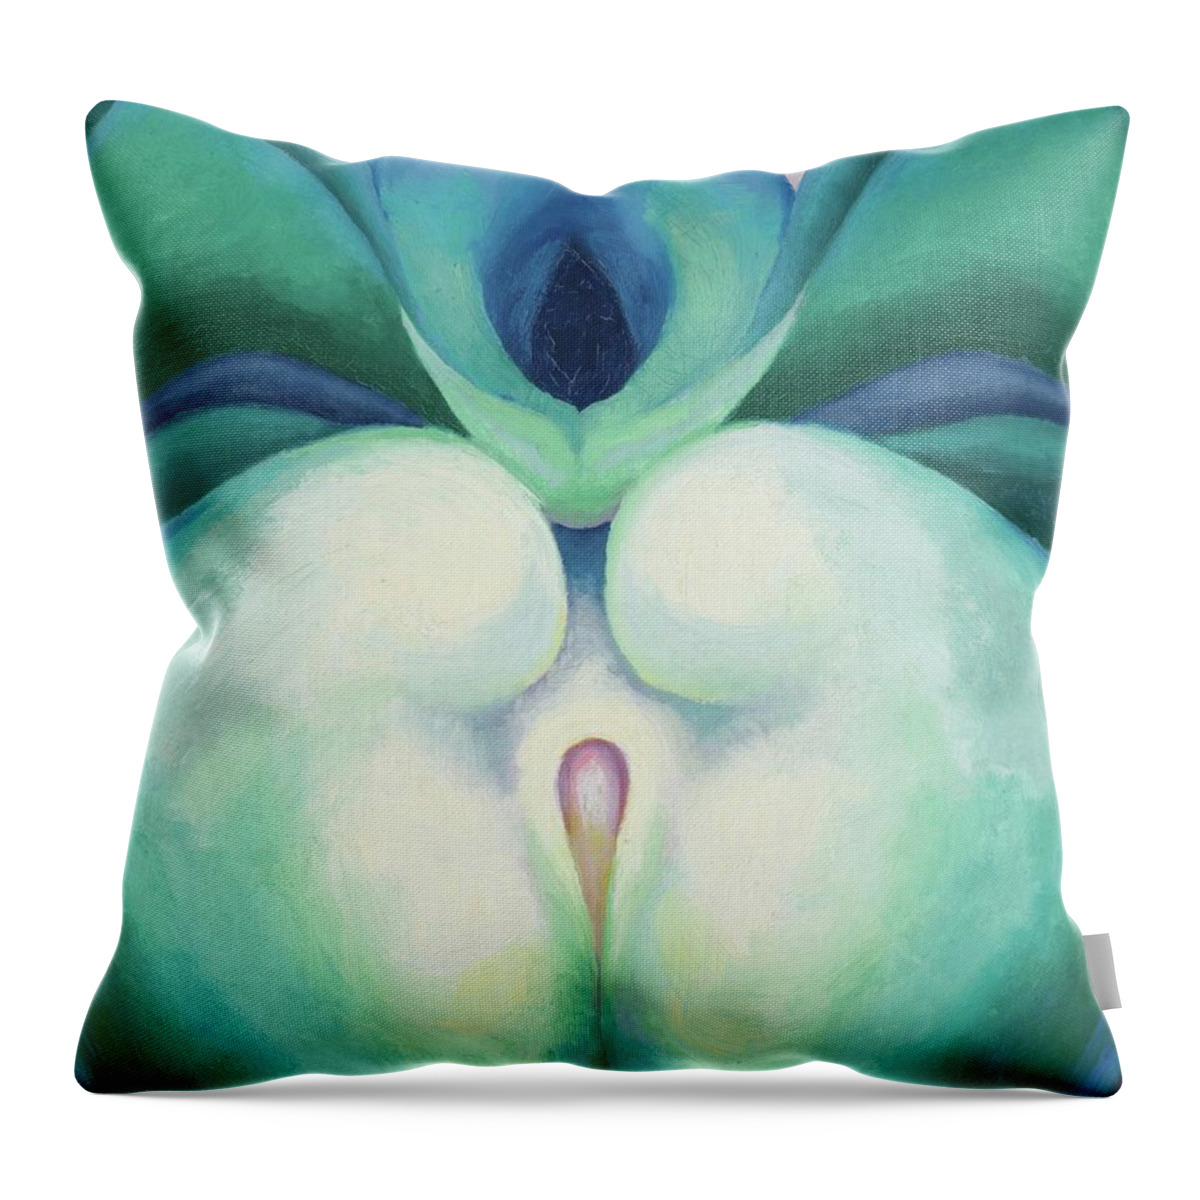 Georgia O'keeffe Throw Pillow featuring the painting White and blue blower shapes - abstract modernist painting by Georgia O'Keeffe